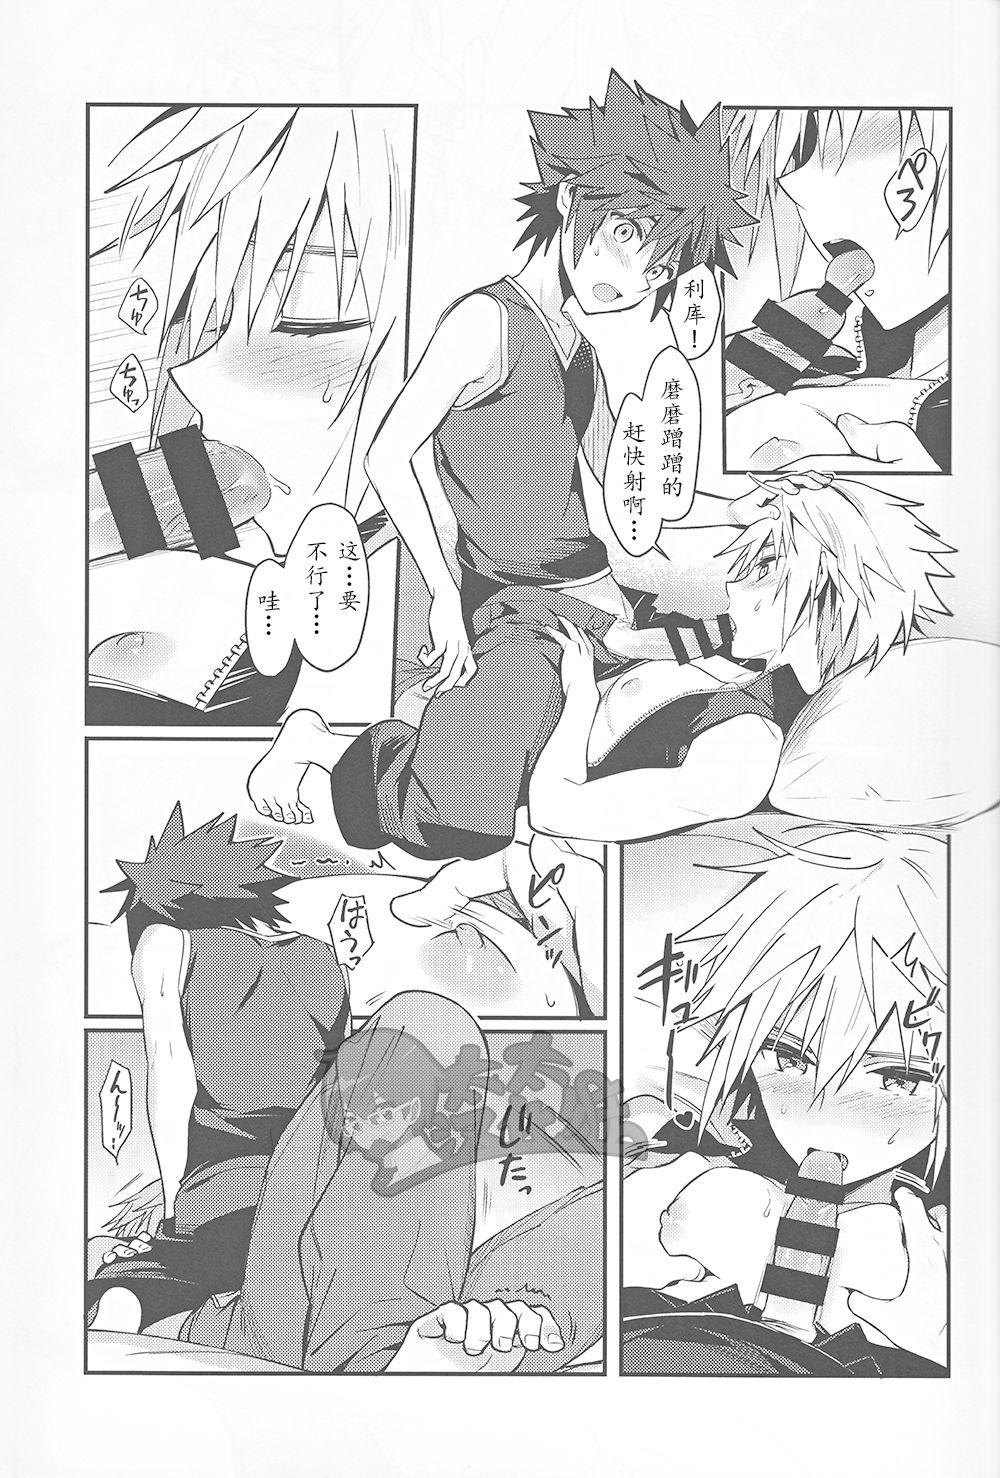 Jerkoff ALL YOU NEED IS OPPAI - Kingdom hearts Gay Brokenboys - Page 10